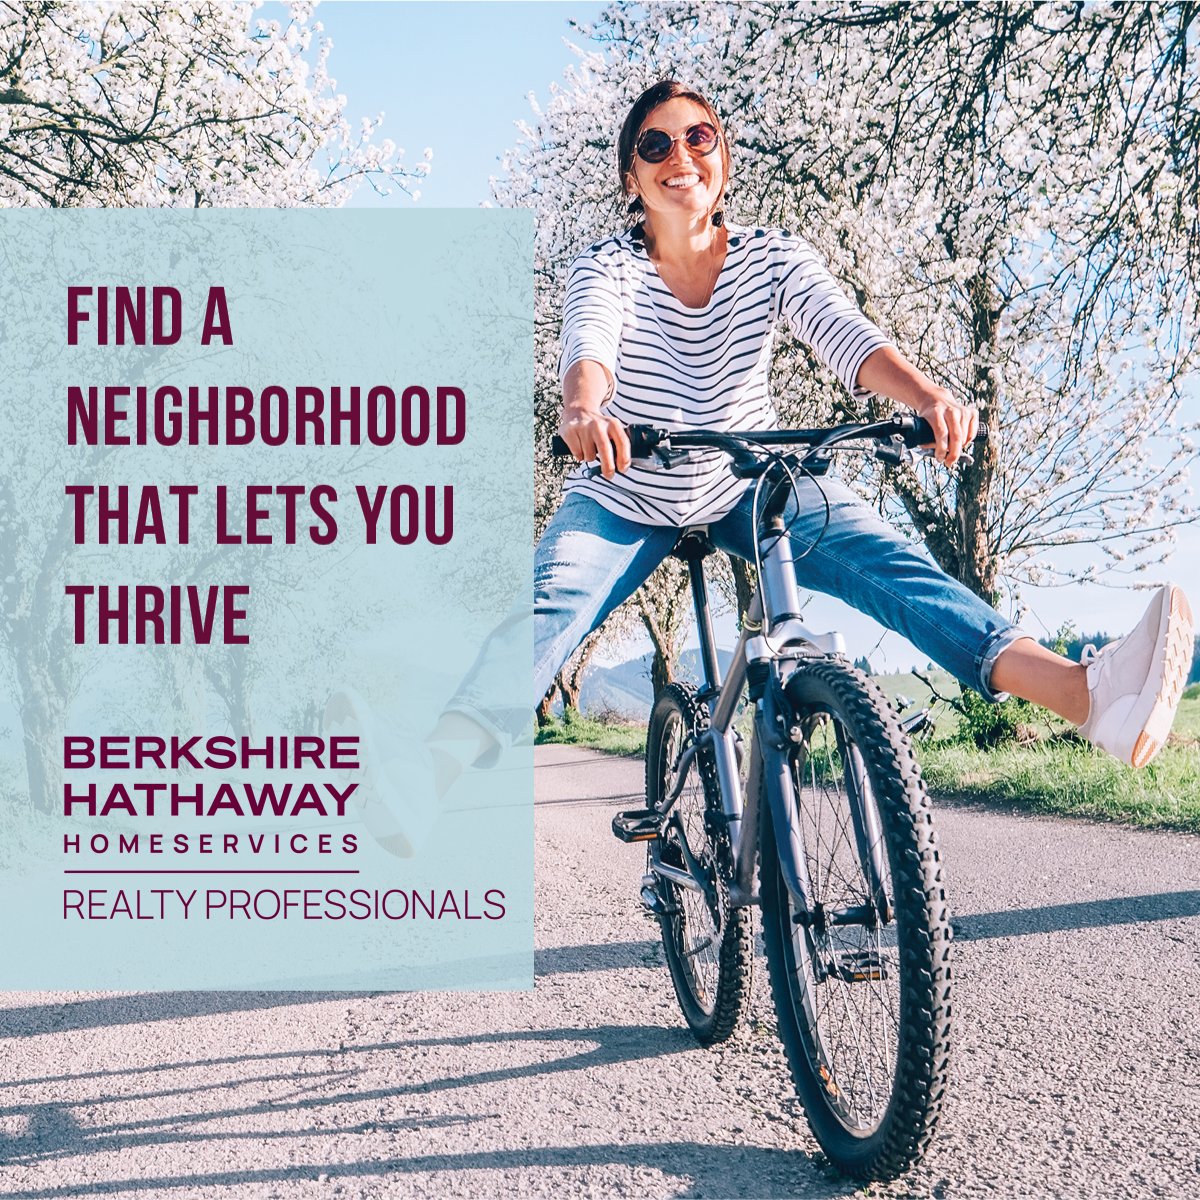 his Spring, uncover neighborhoods bursting with potential. Get in touch with your Forever Agent℠ today! #BHHS #BHHSRealEstate #SpringMove #FreshStart #ForeverBrand